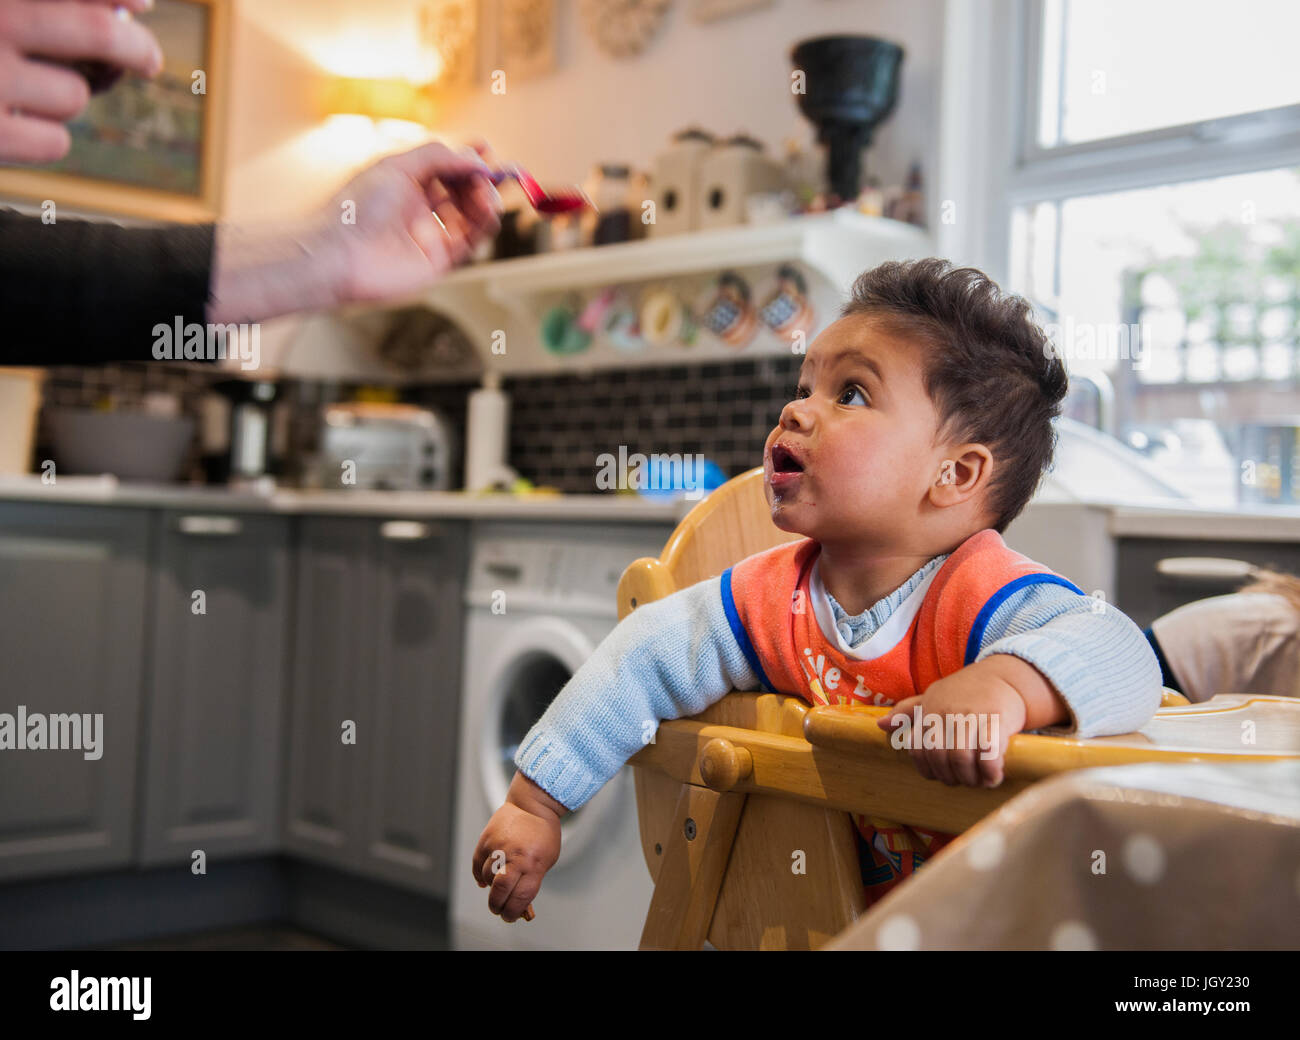 Baby boy in highchair being fed Stock Photo